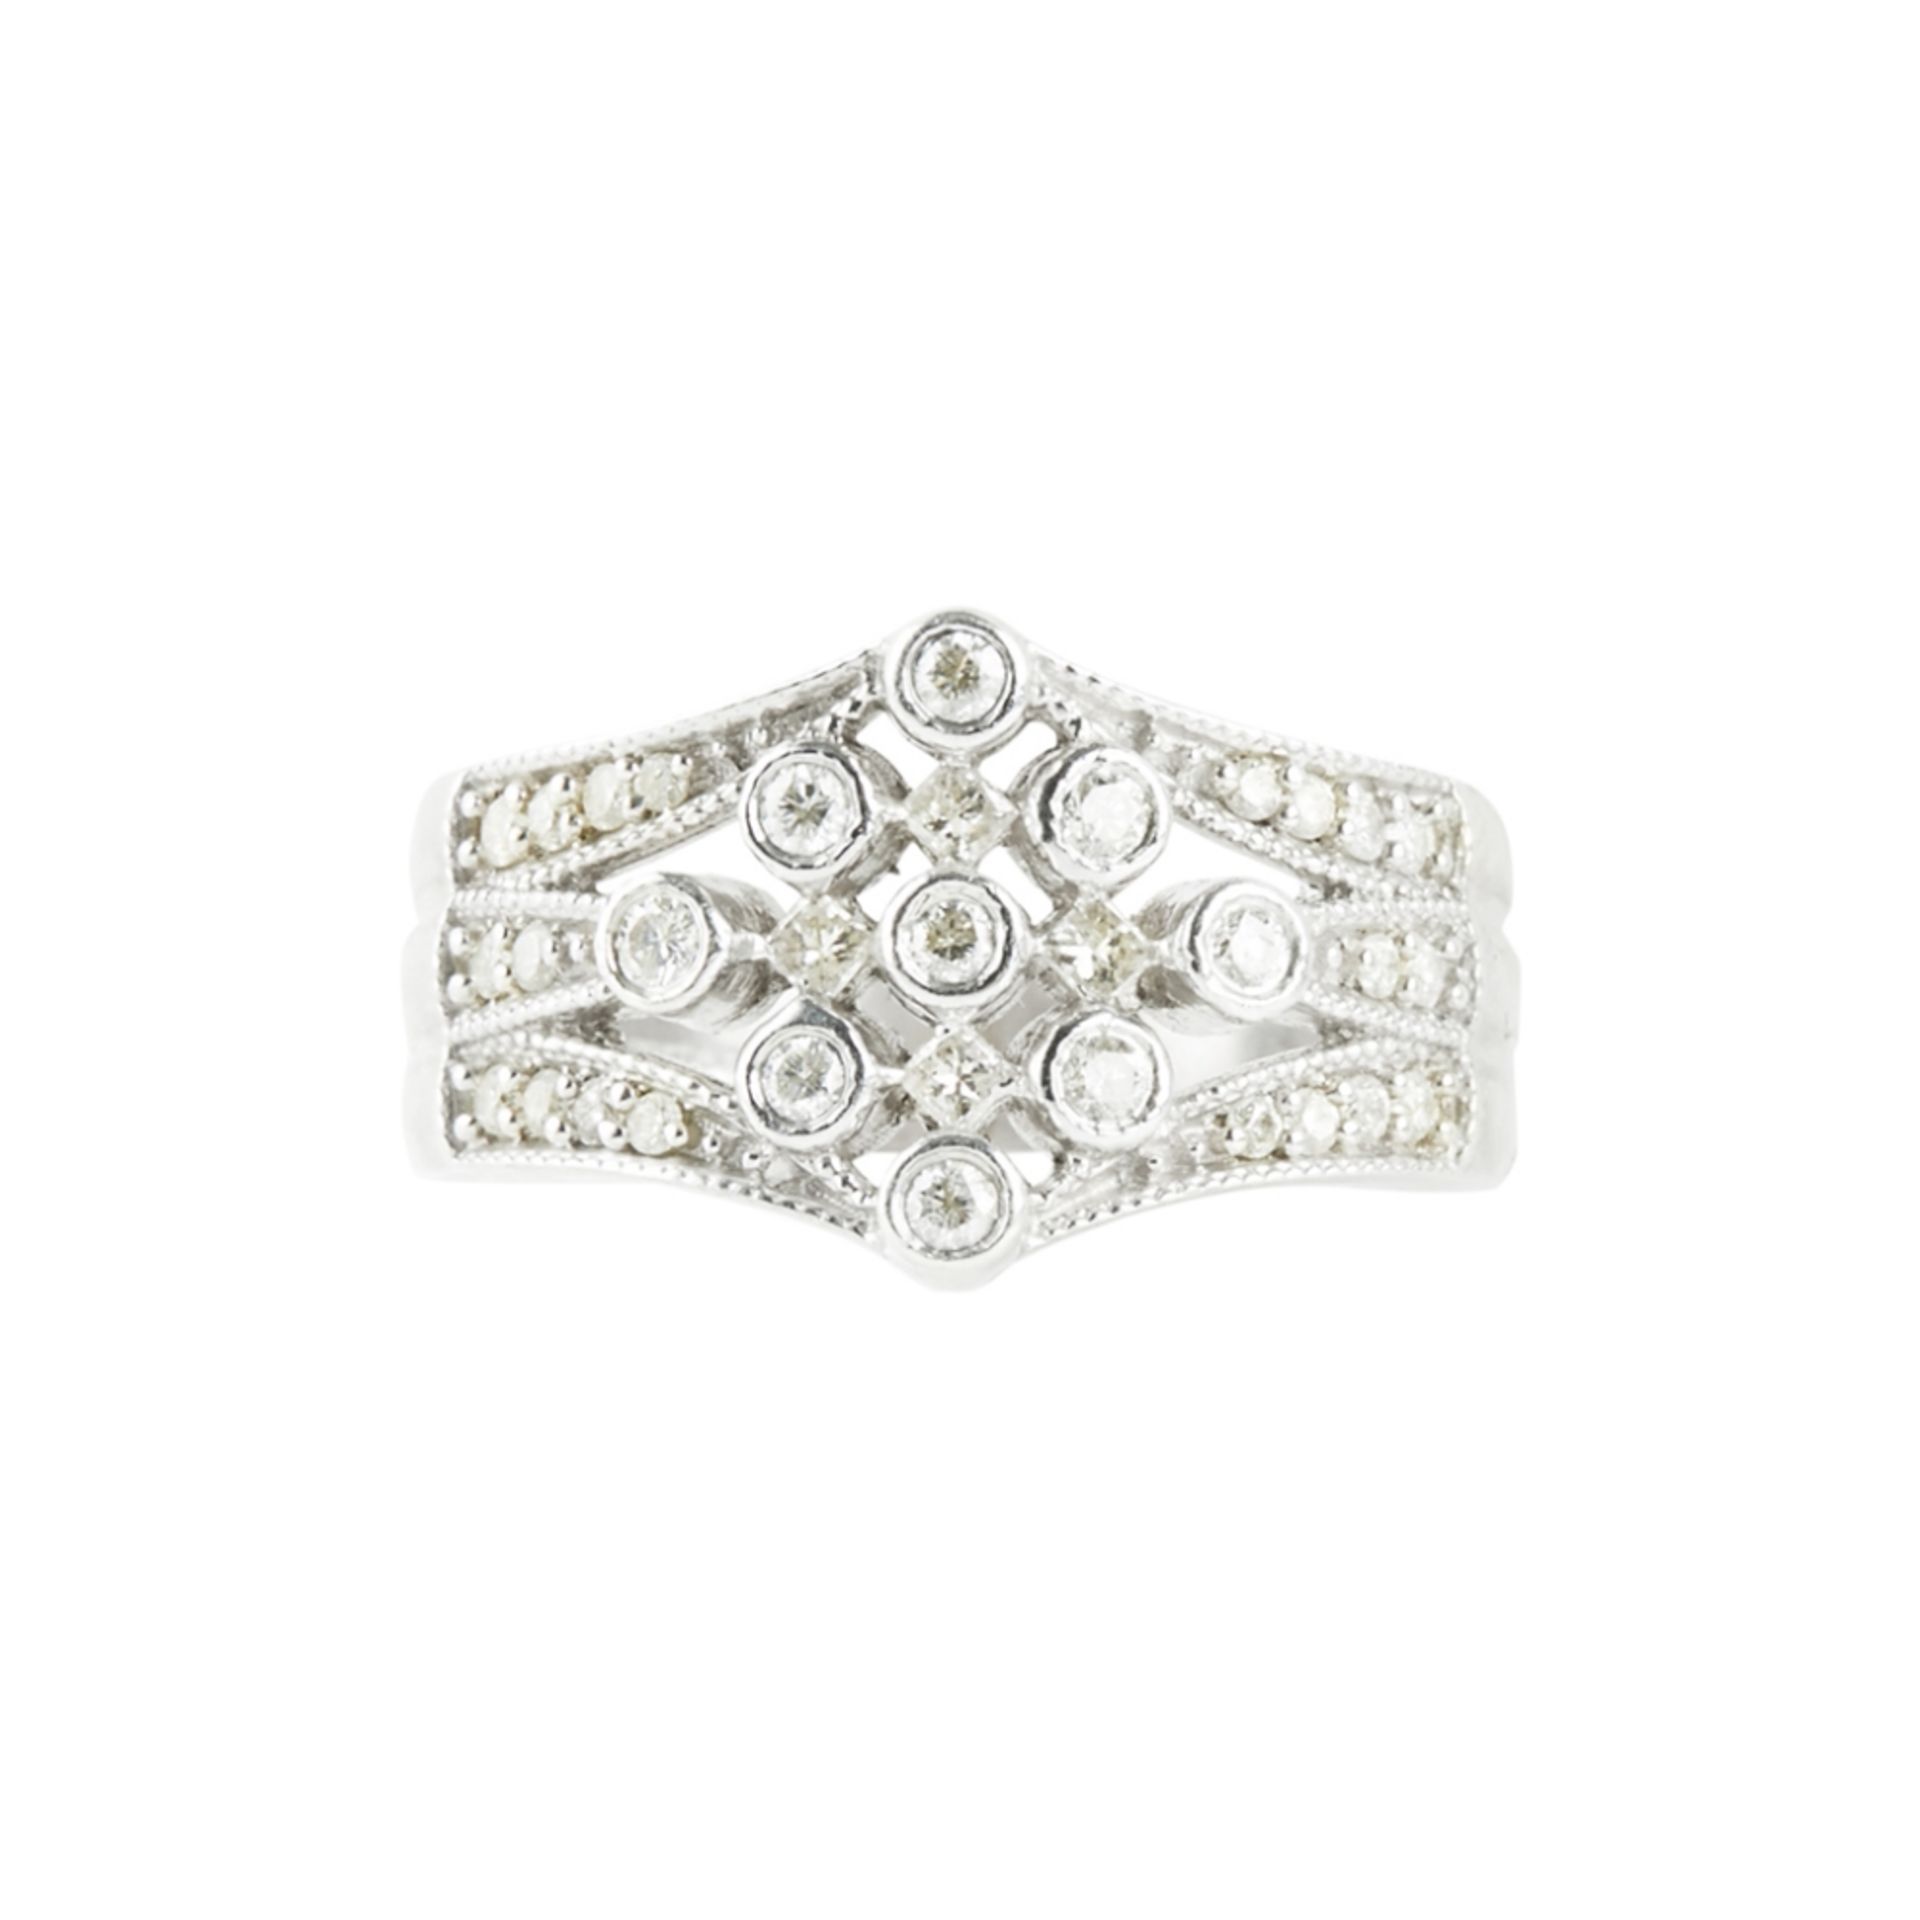 A diamond set ring the tapering pierced design set throughout with small round cut diamonds, to a